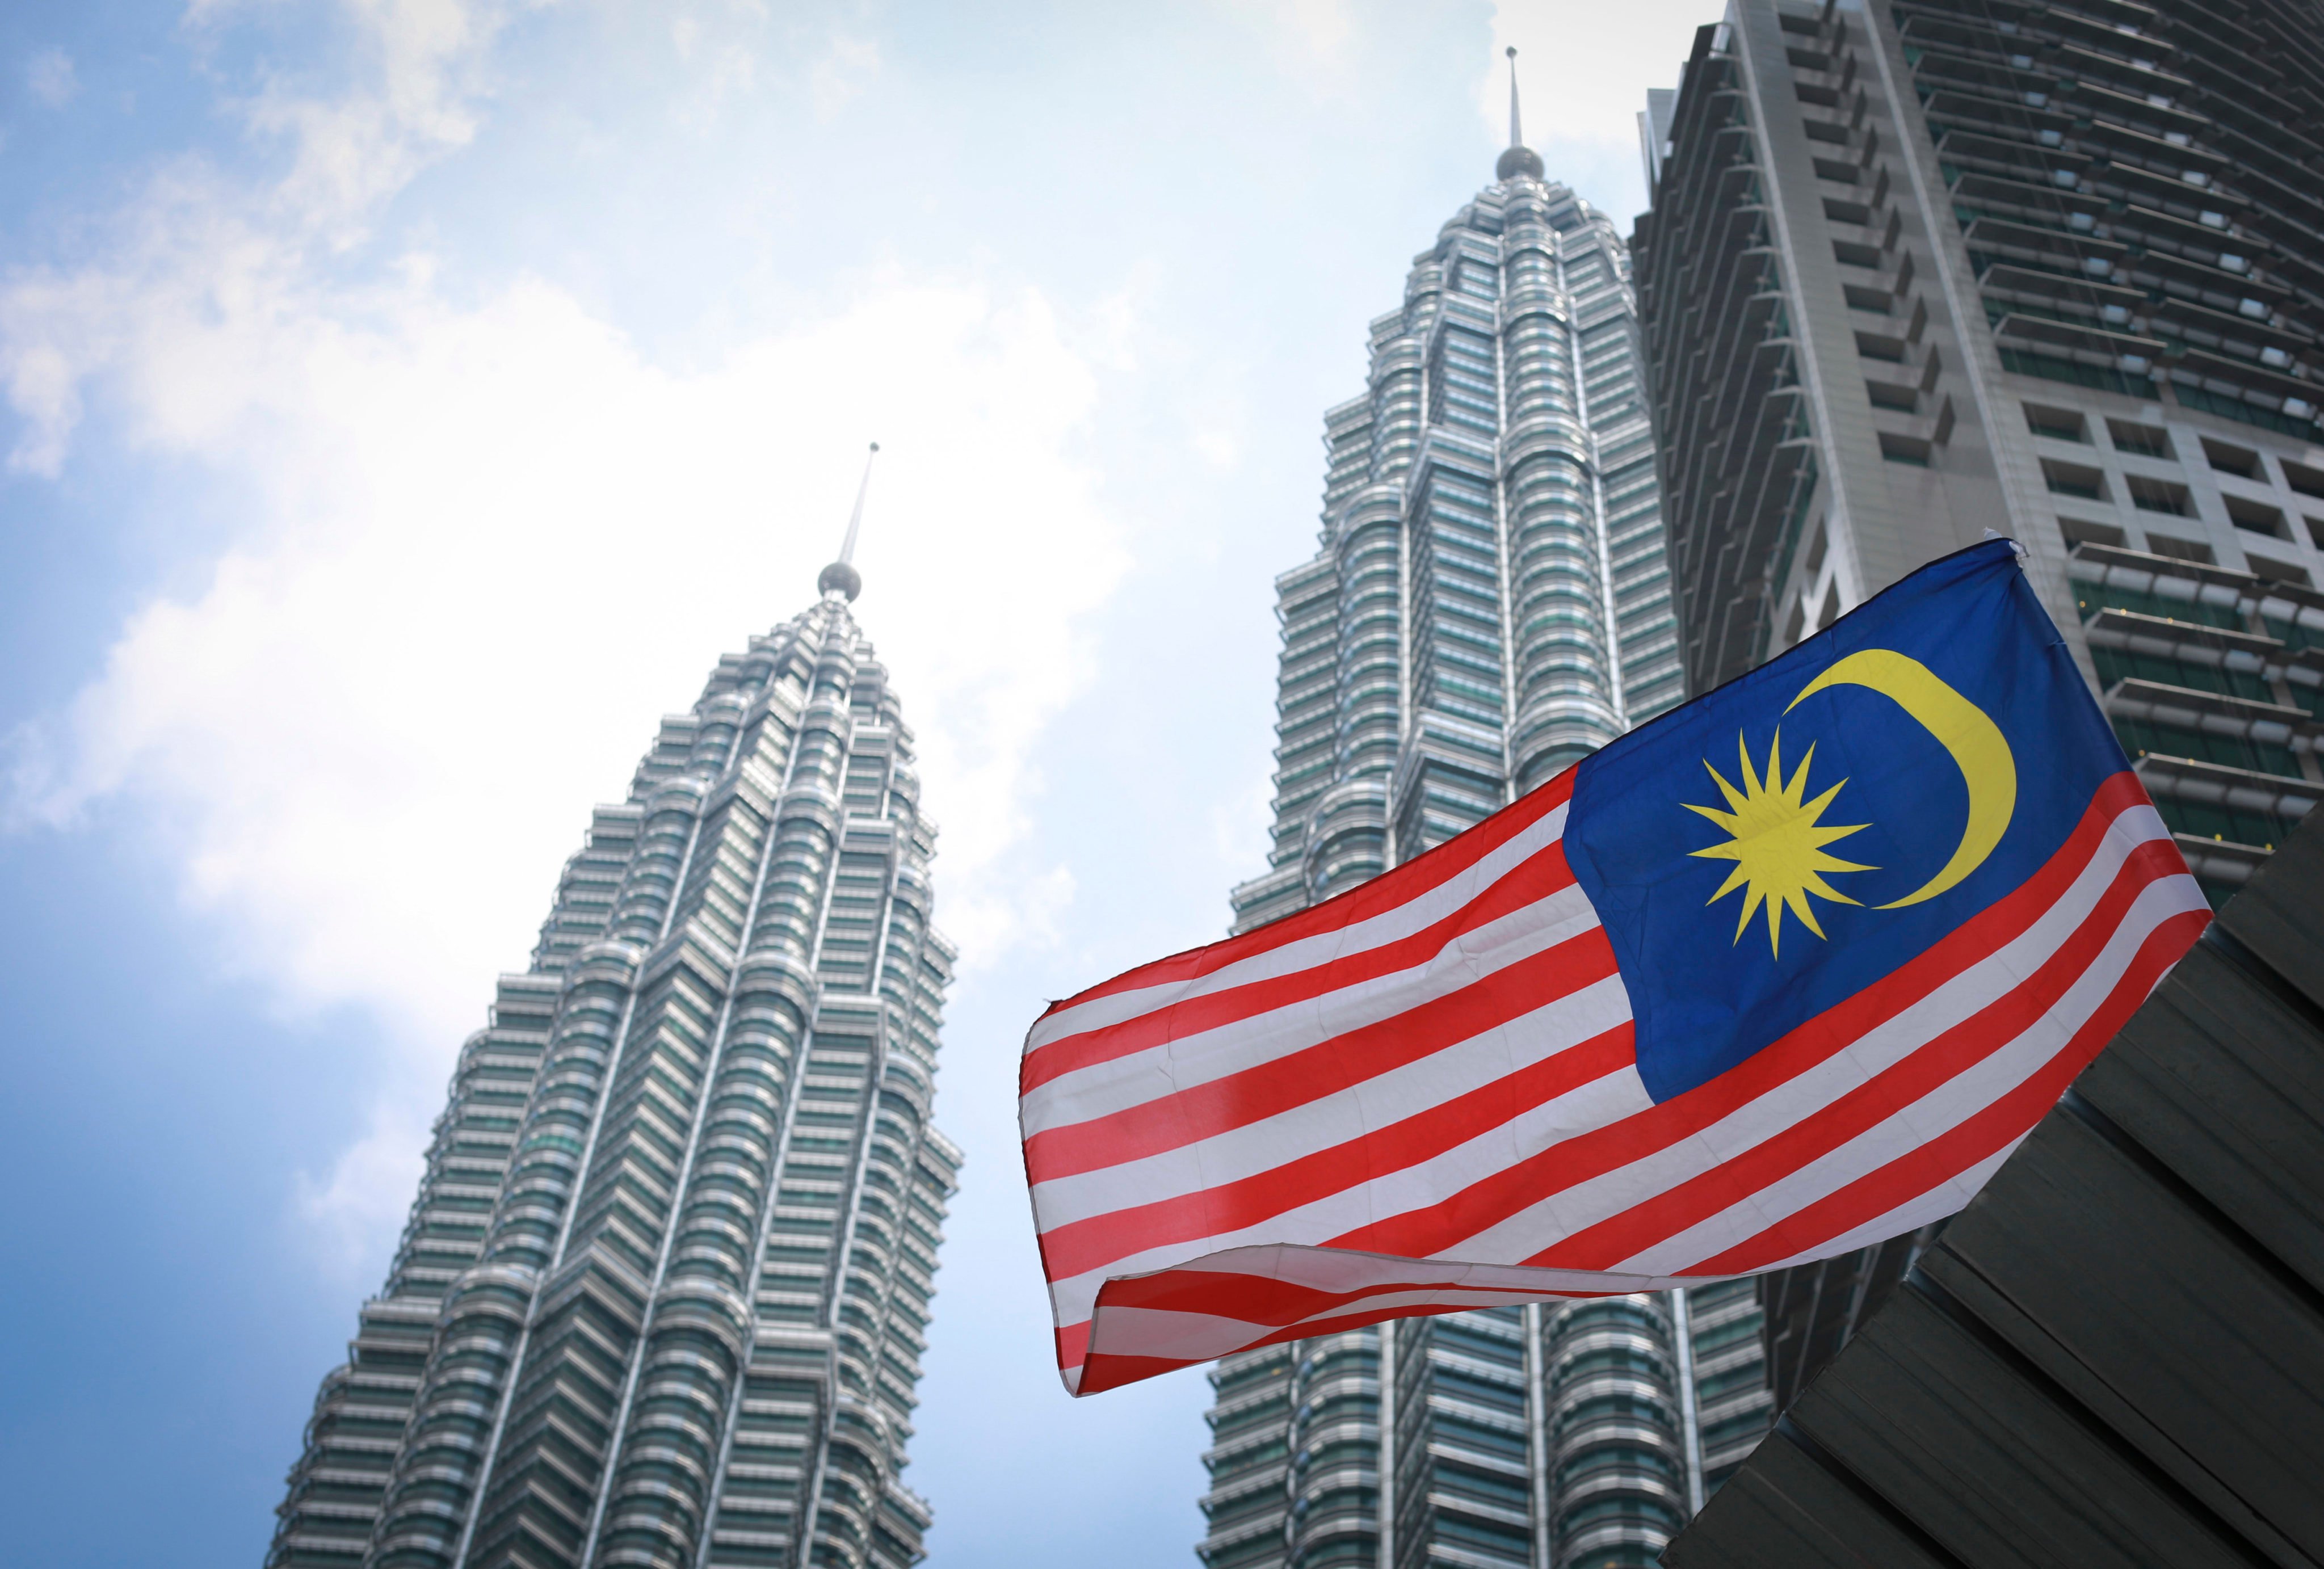 Malaysia’s national flag flies in front of its landmark Petronas Twin Towers in Kuala Lumpur. The nation’s central bank said Malaysia’s economic growth this year will be driven by improved external demand and strong domestic spending. Photo: AP